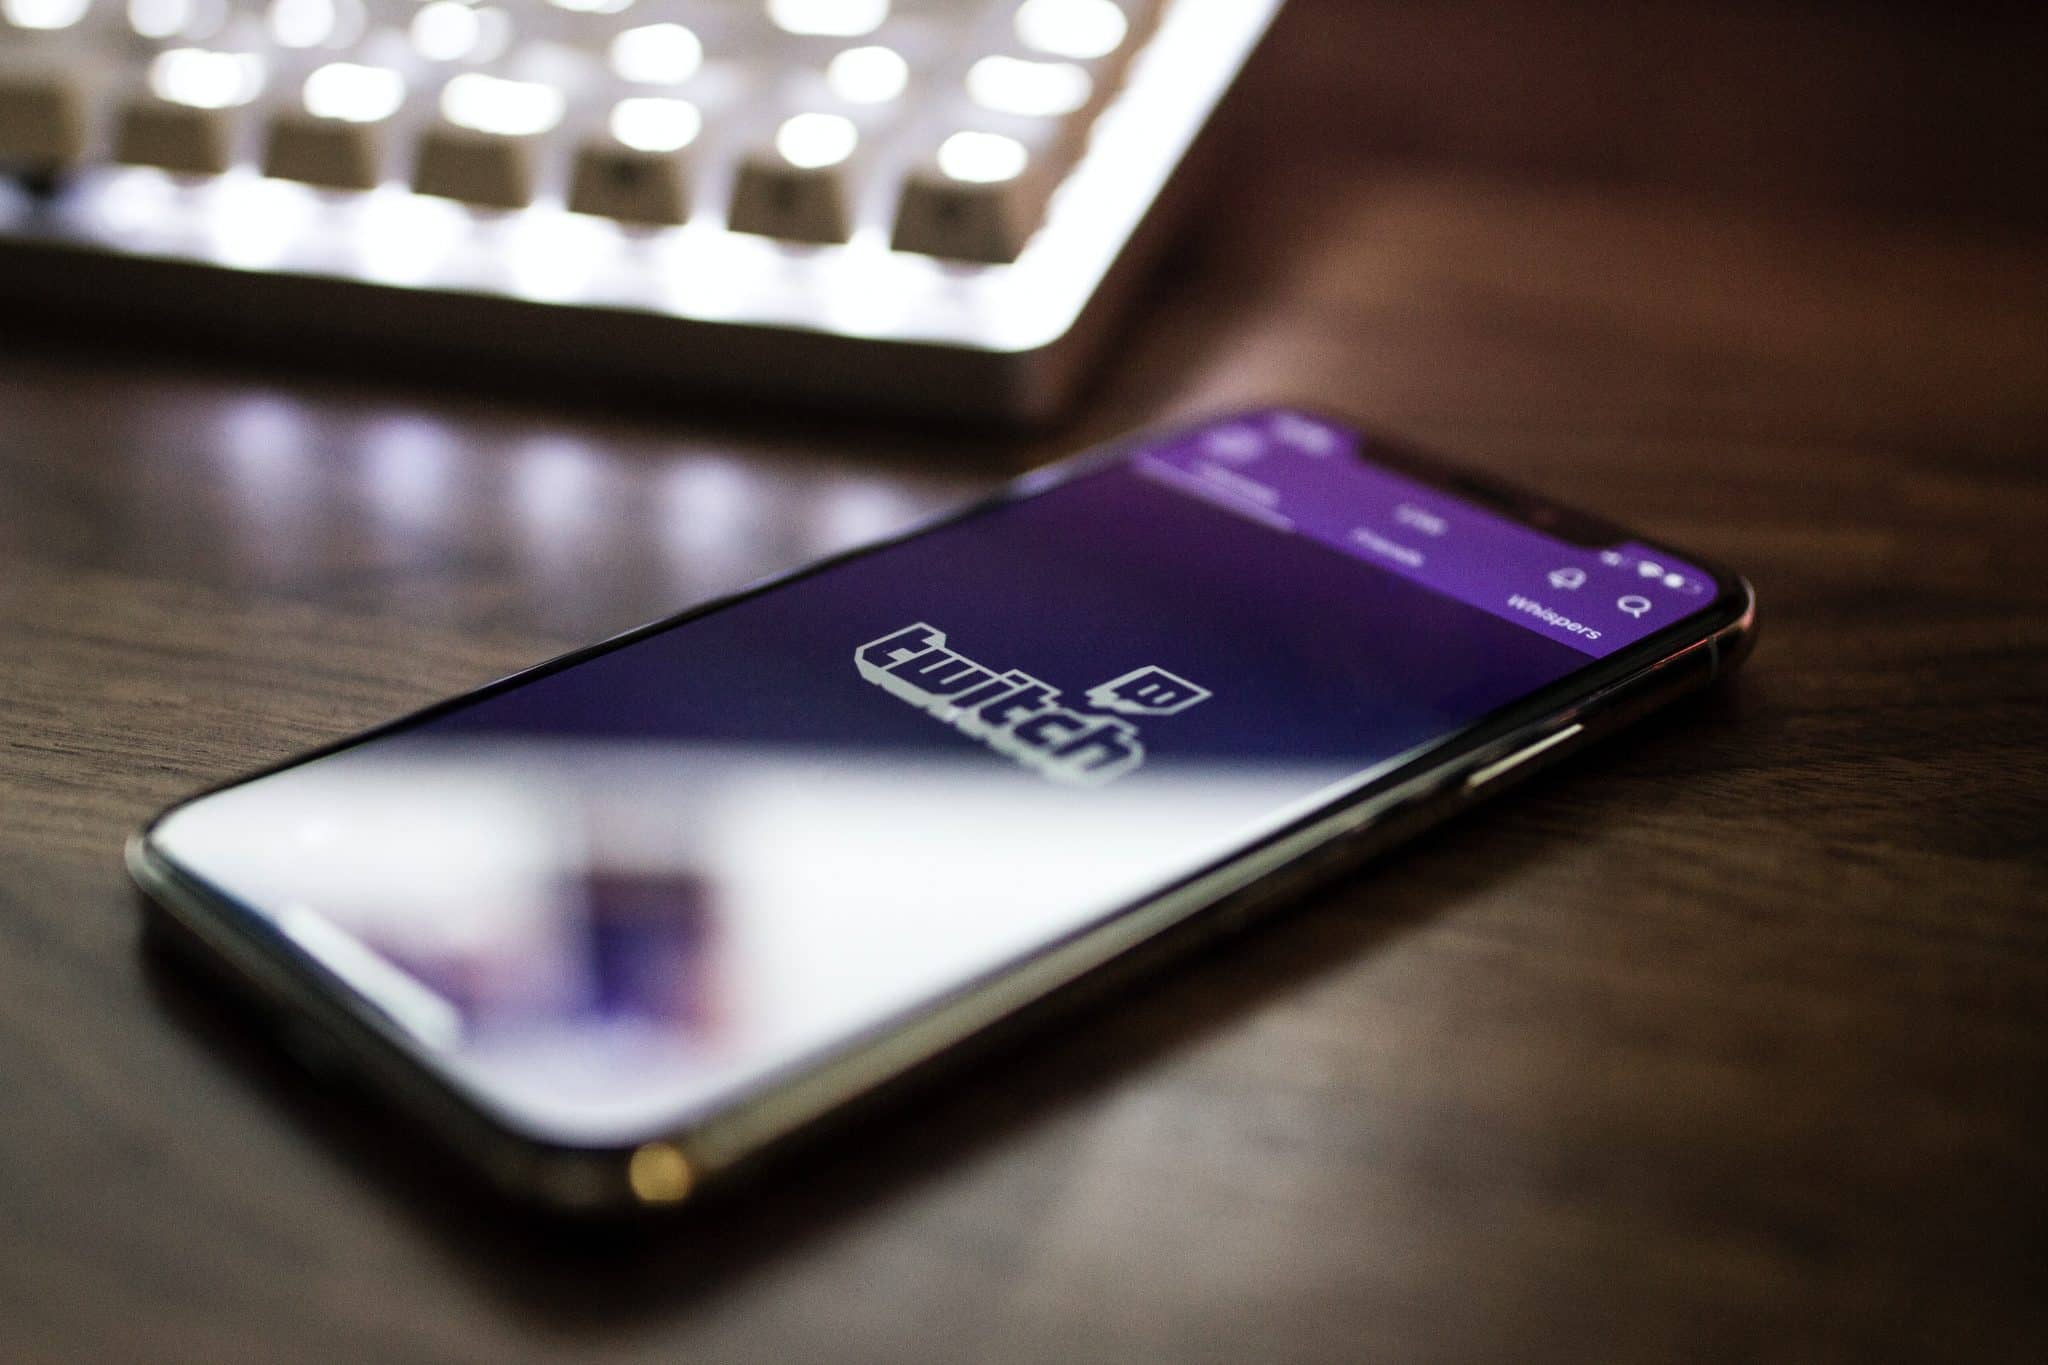 Twitch mobile phone app